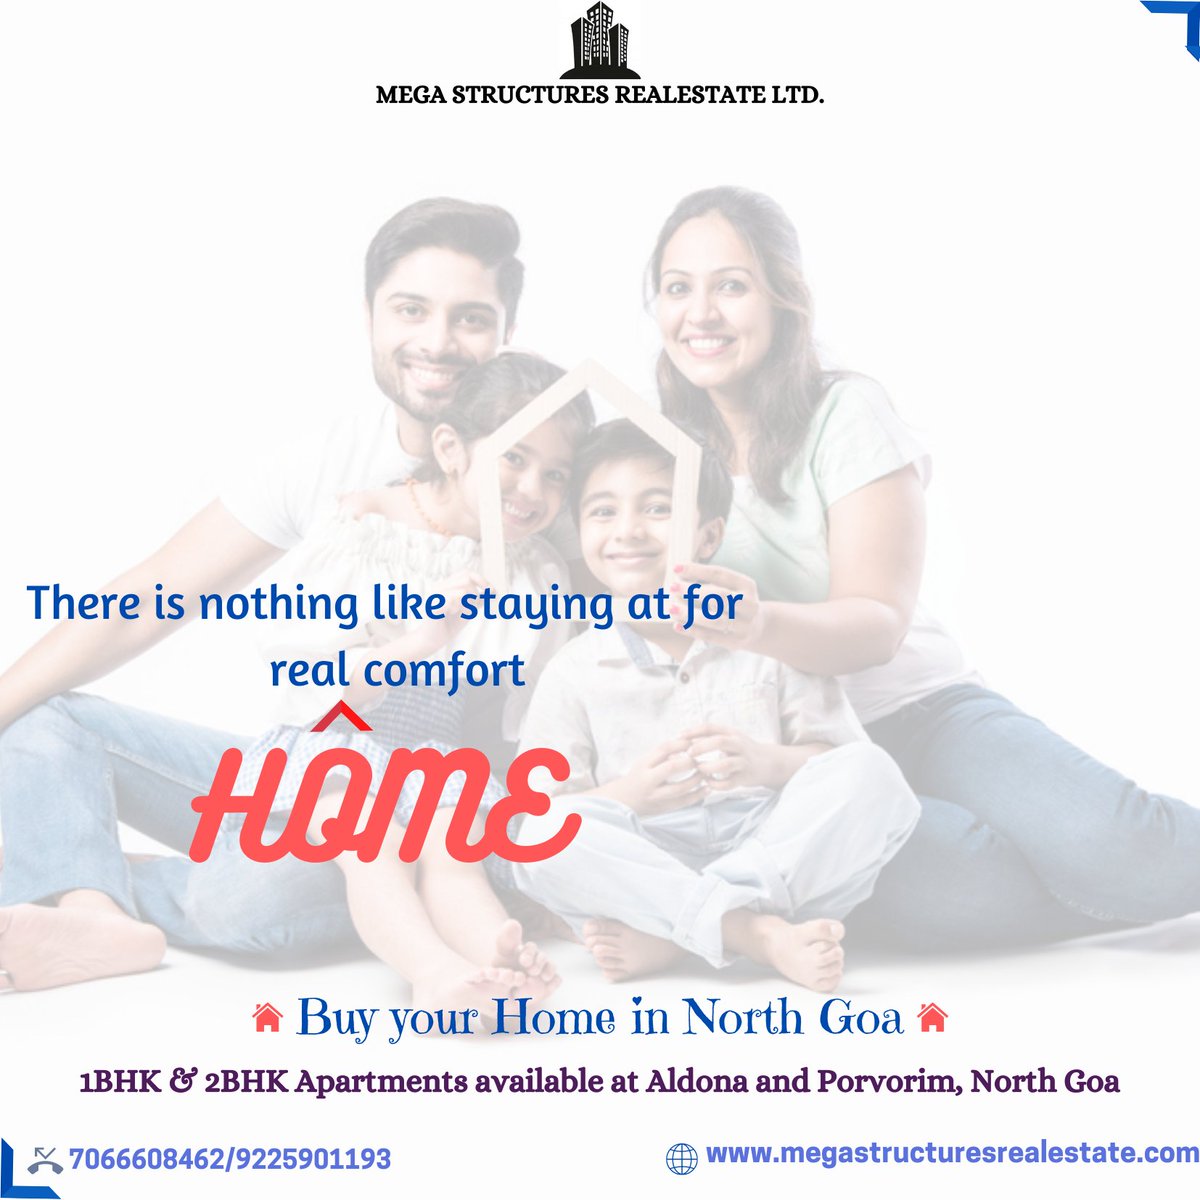 Buy your home In North Goa. Spacious 1BHK & 2BHK Apartments in Aldona and Porvorim ; Beautiful Location,  Good Amenities and Beautiful View.
For more details call-7066608462/9225901193
Visit- megastructuresrealestate.com
#apartments #northgoa #Goa #spaciousapartments #view #realestate